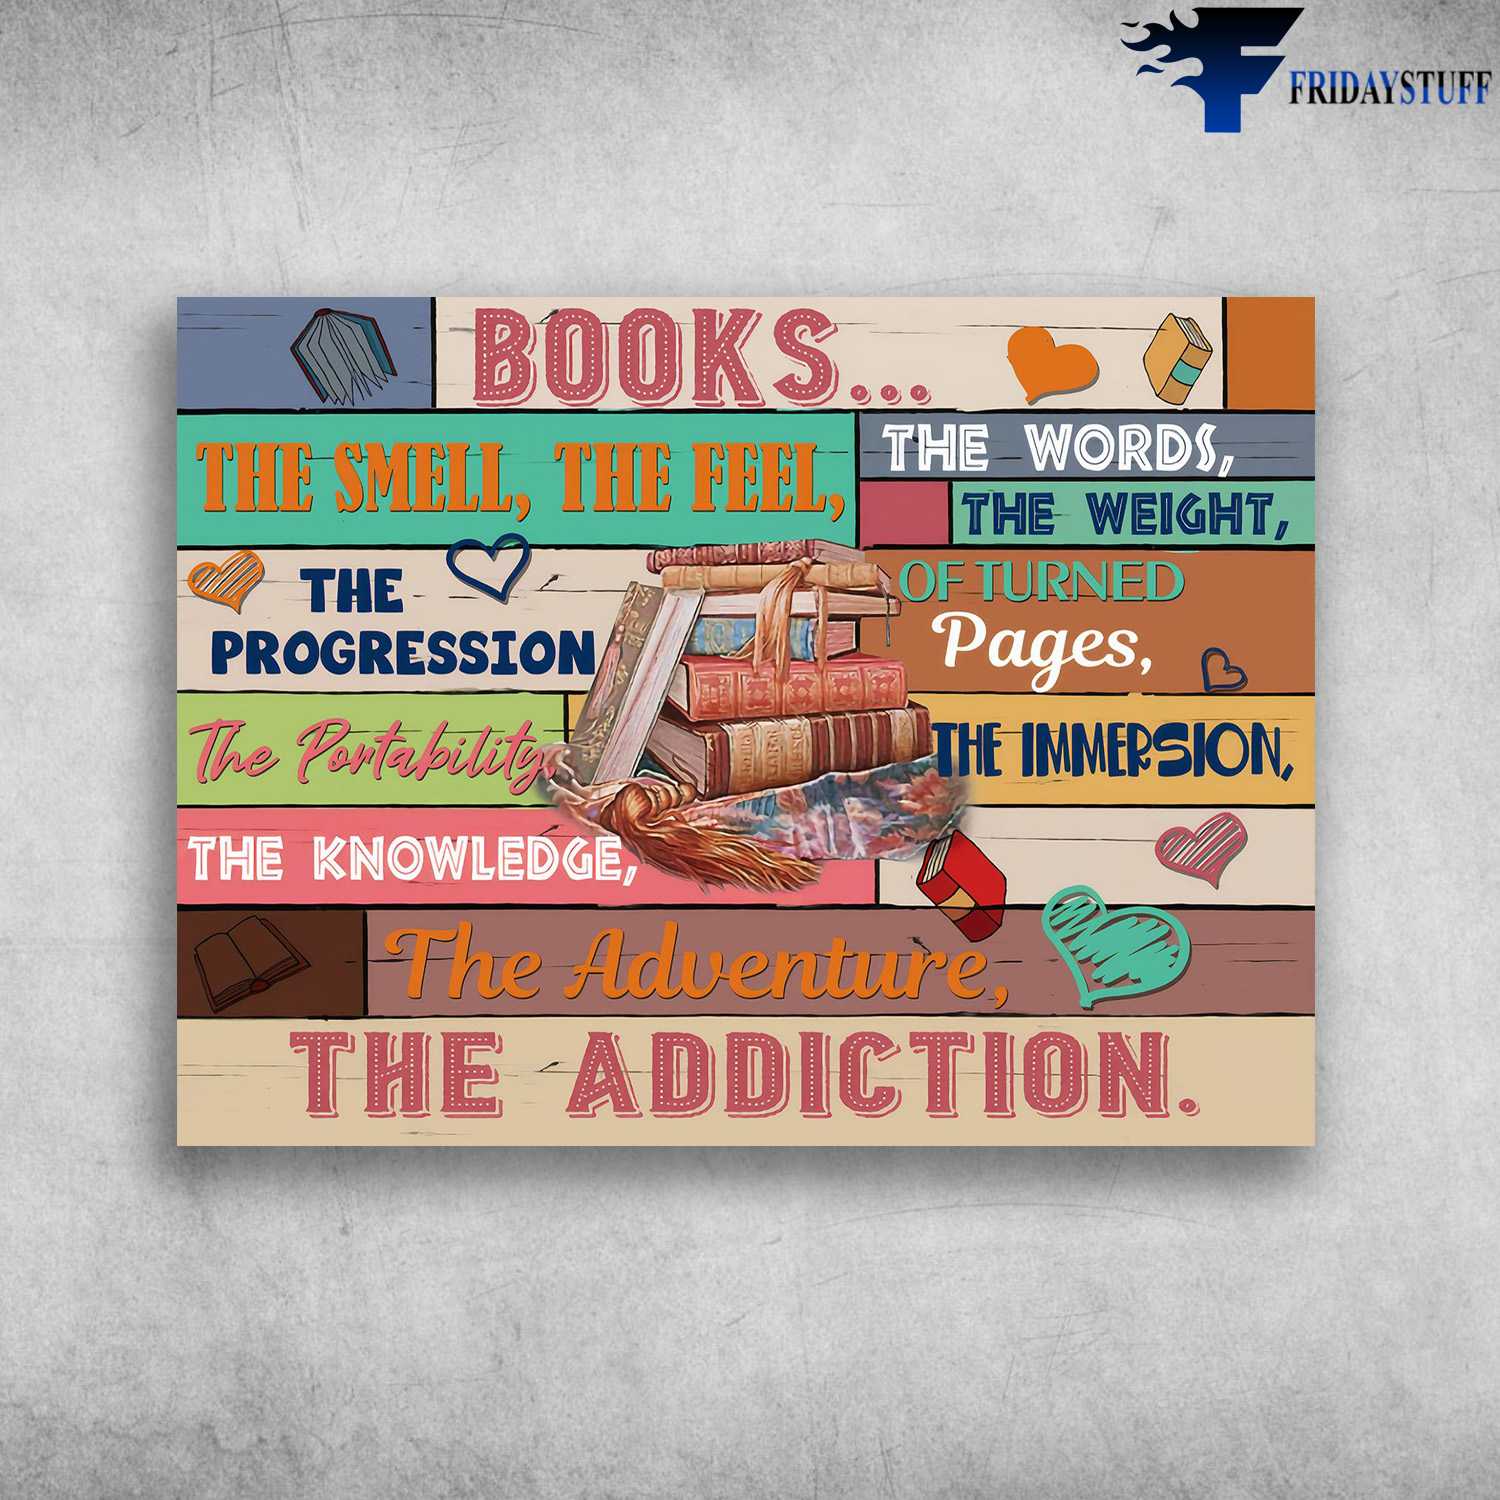 Books Lover, Library Poster - The Smell, The Feel, The Words, The Weight, The Progression, Of Turned Pages, The Portability, The Immersion, The Knowledge, The Adventure, The Addiction